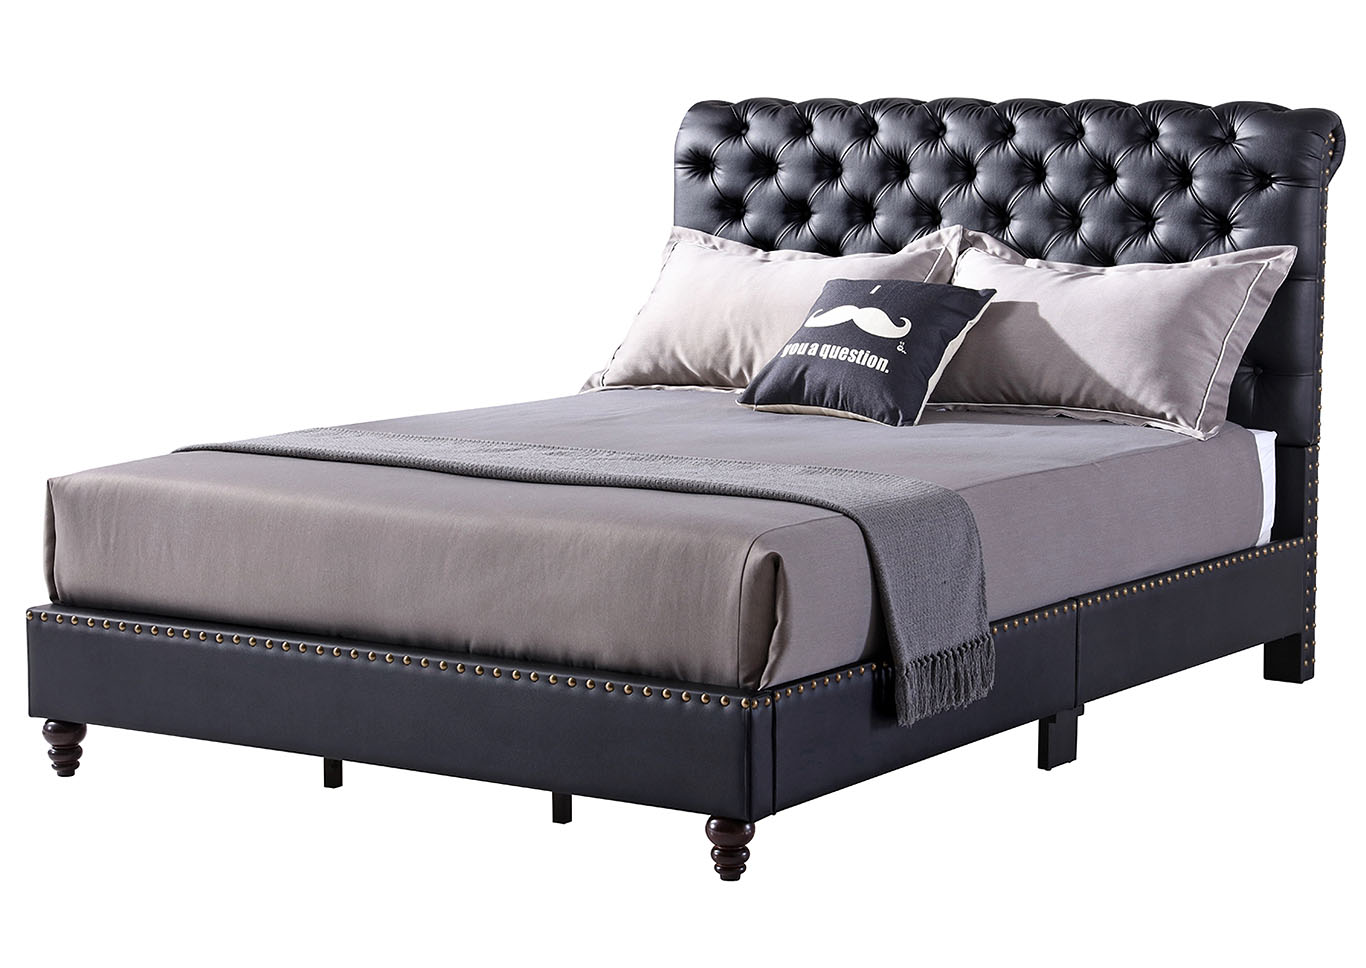 Black Faux Leather Tufted Upholstered King Bed,Glory Furniture